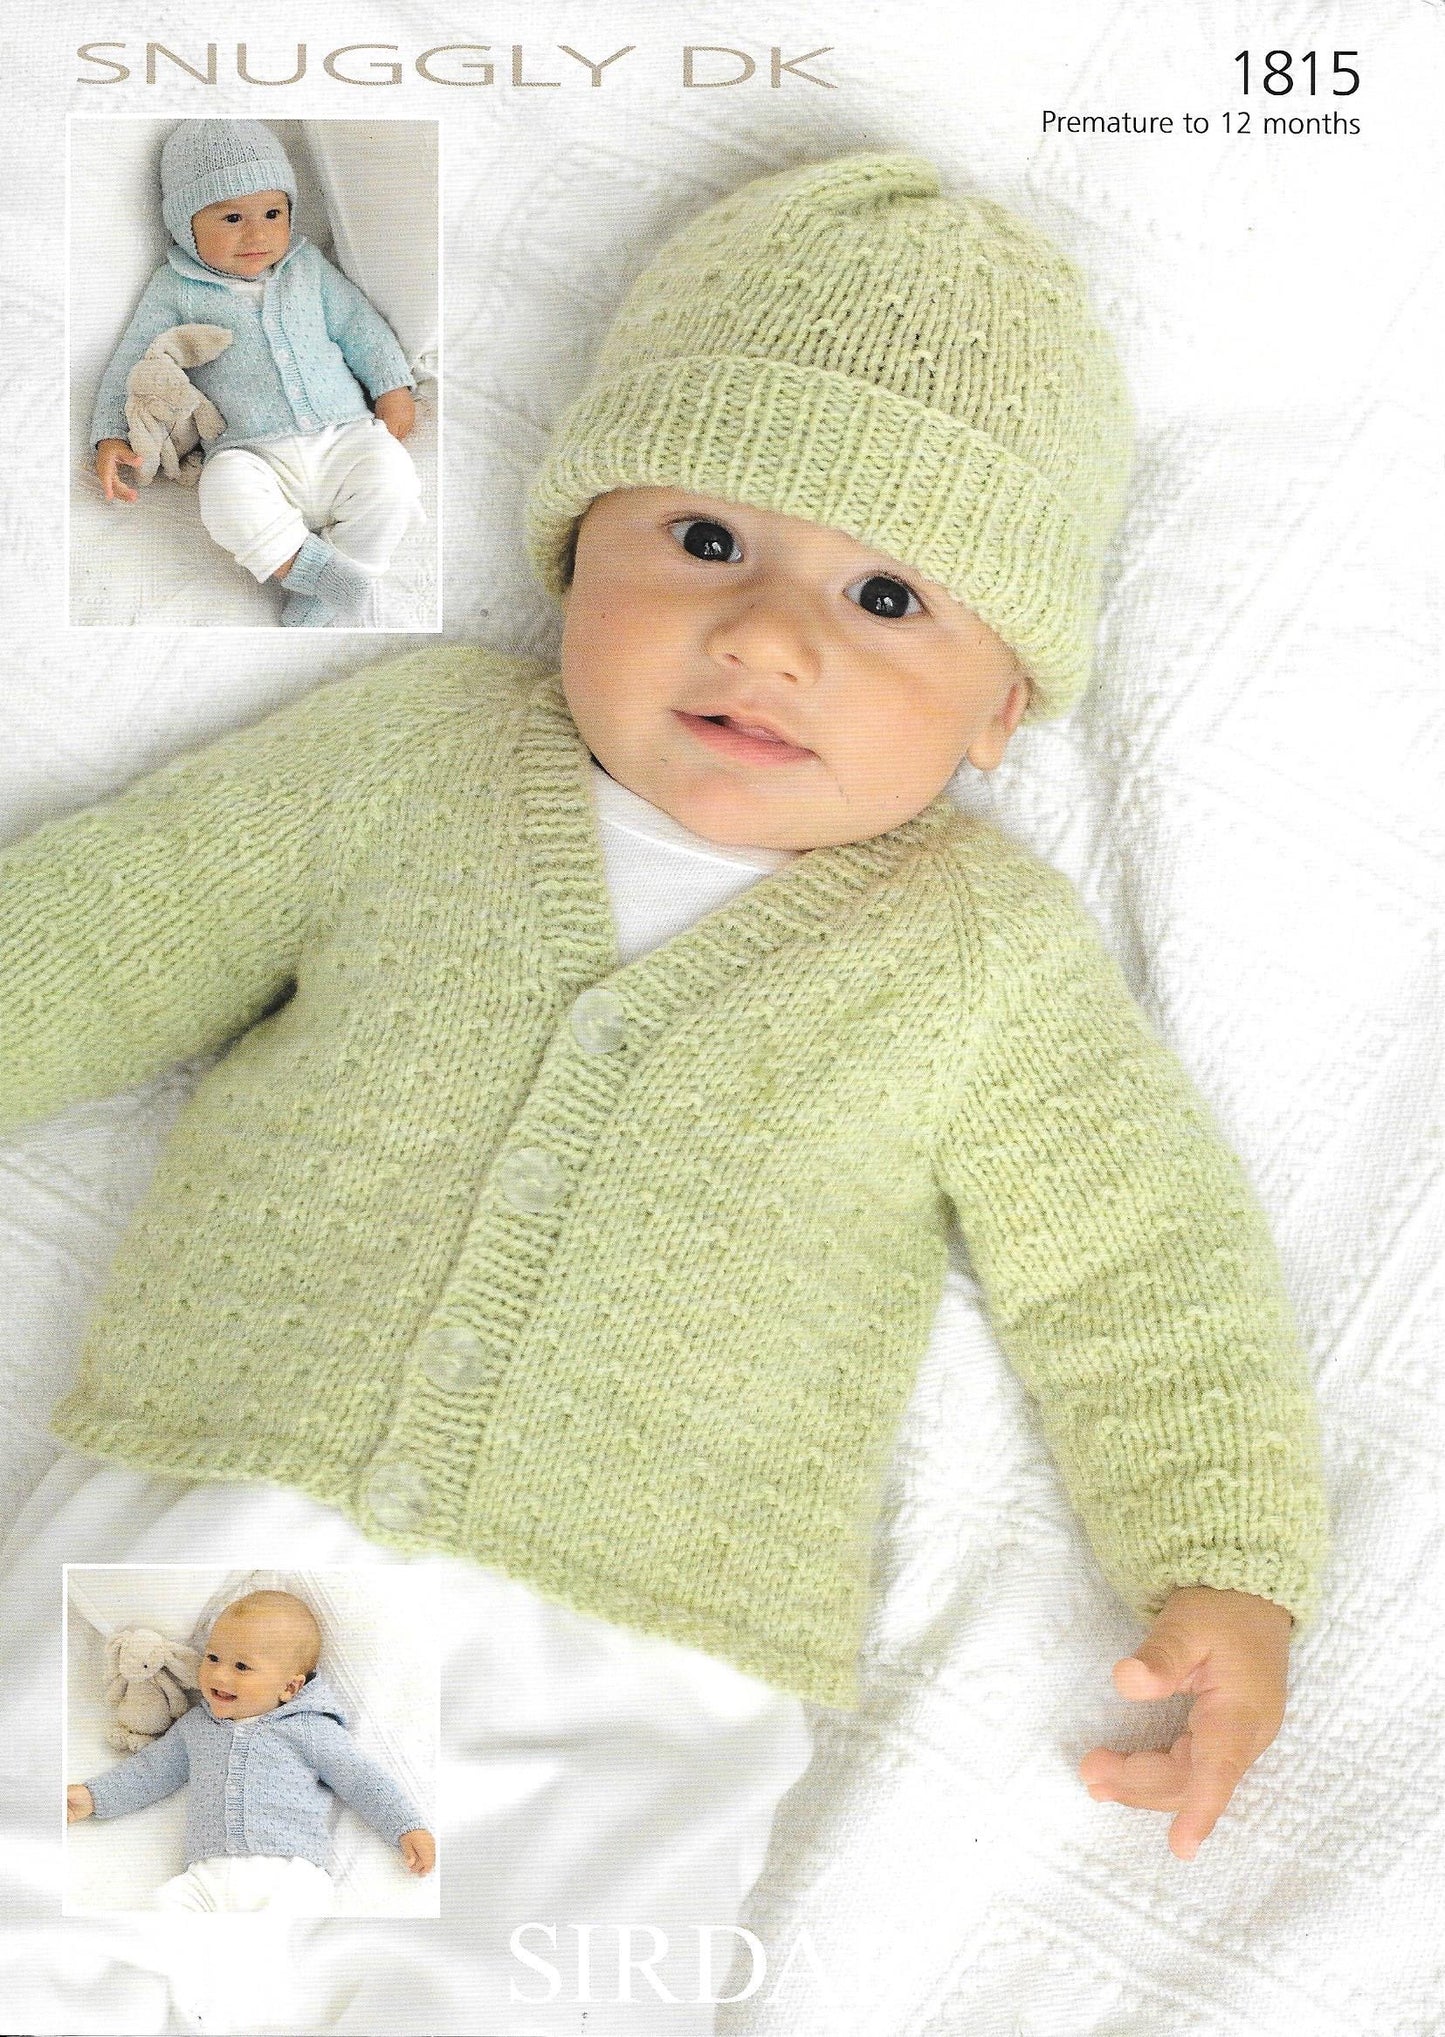 1815 Sirdar Snuggly dk baby cardigans, hats, bootees and mittens knitting pattern